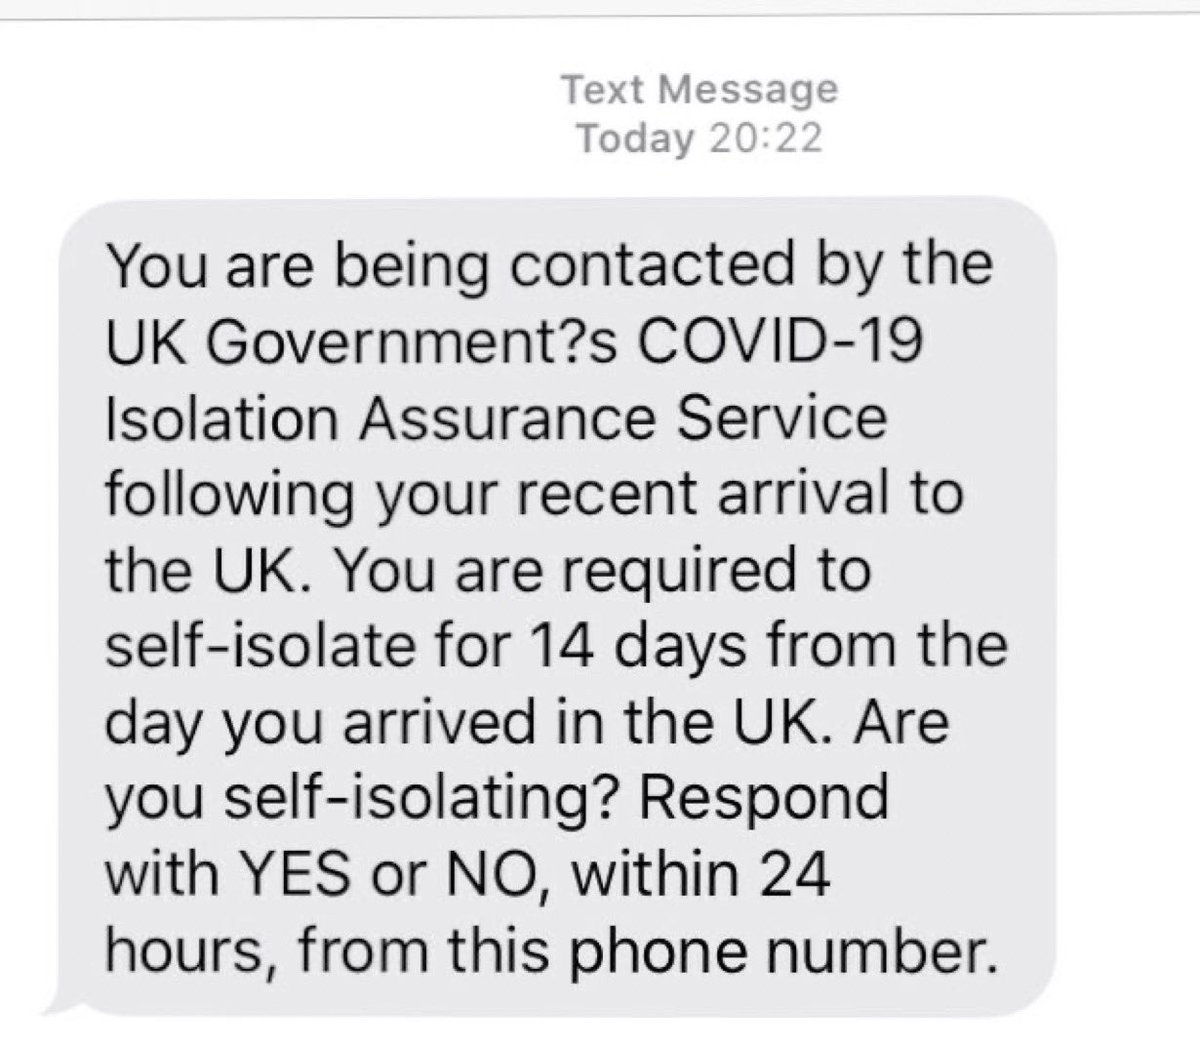 The following day I got this text message. Note the difference in the name of the purported Government agency. Also, again, no return contact details. By now I was very suspicious that this was a scam, thinking that there might have been some kind of data breach. 5/